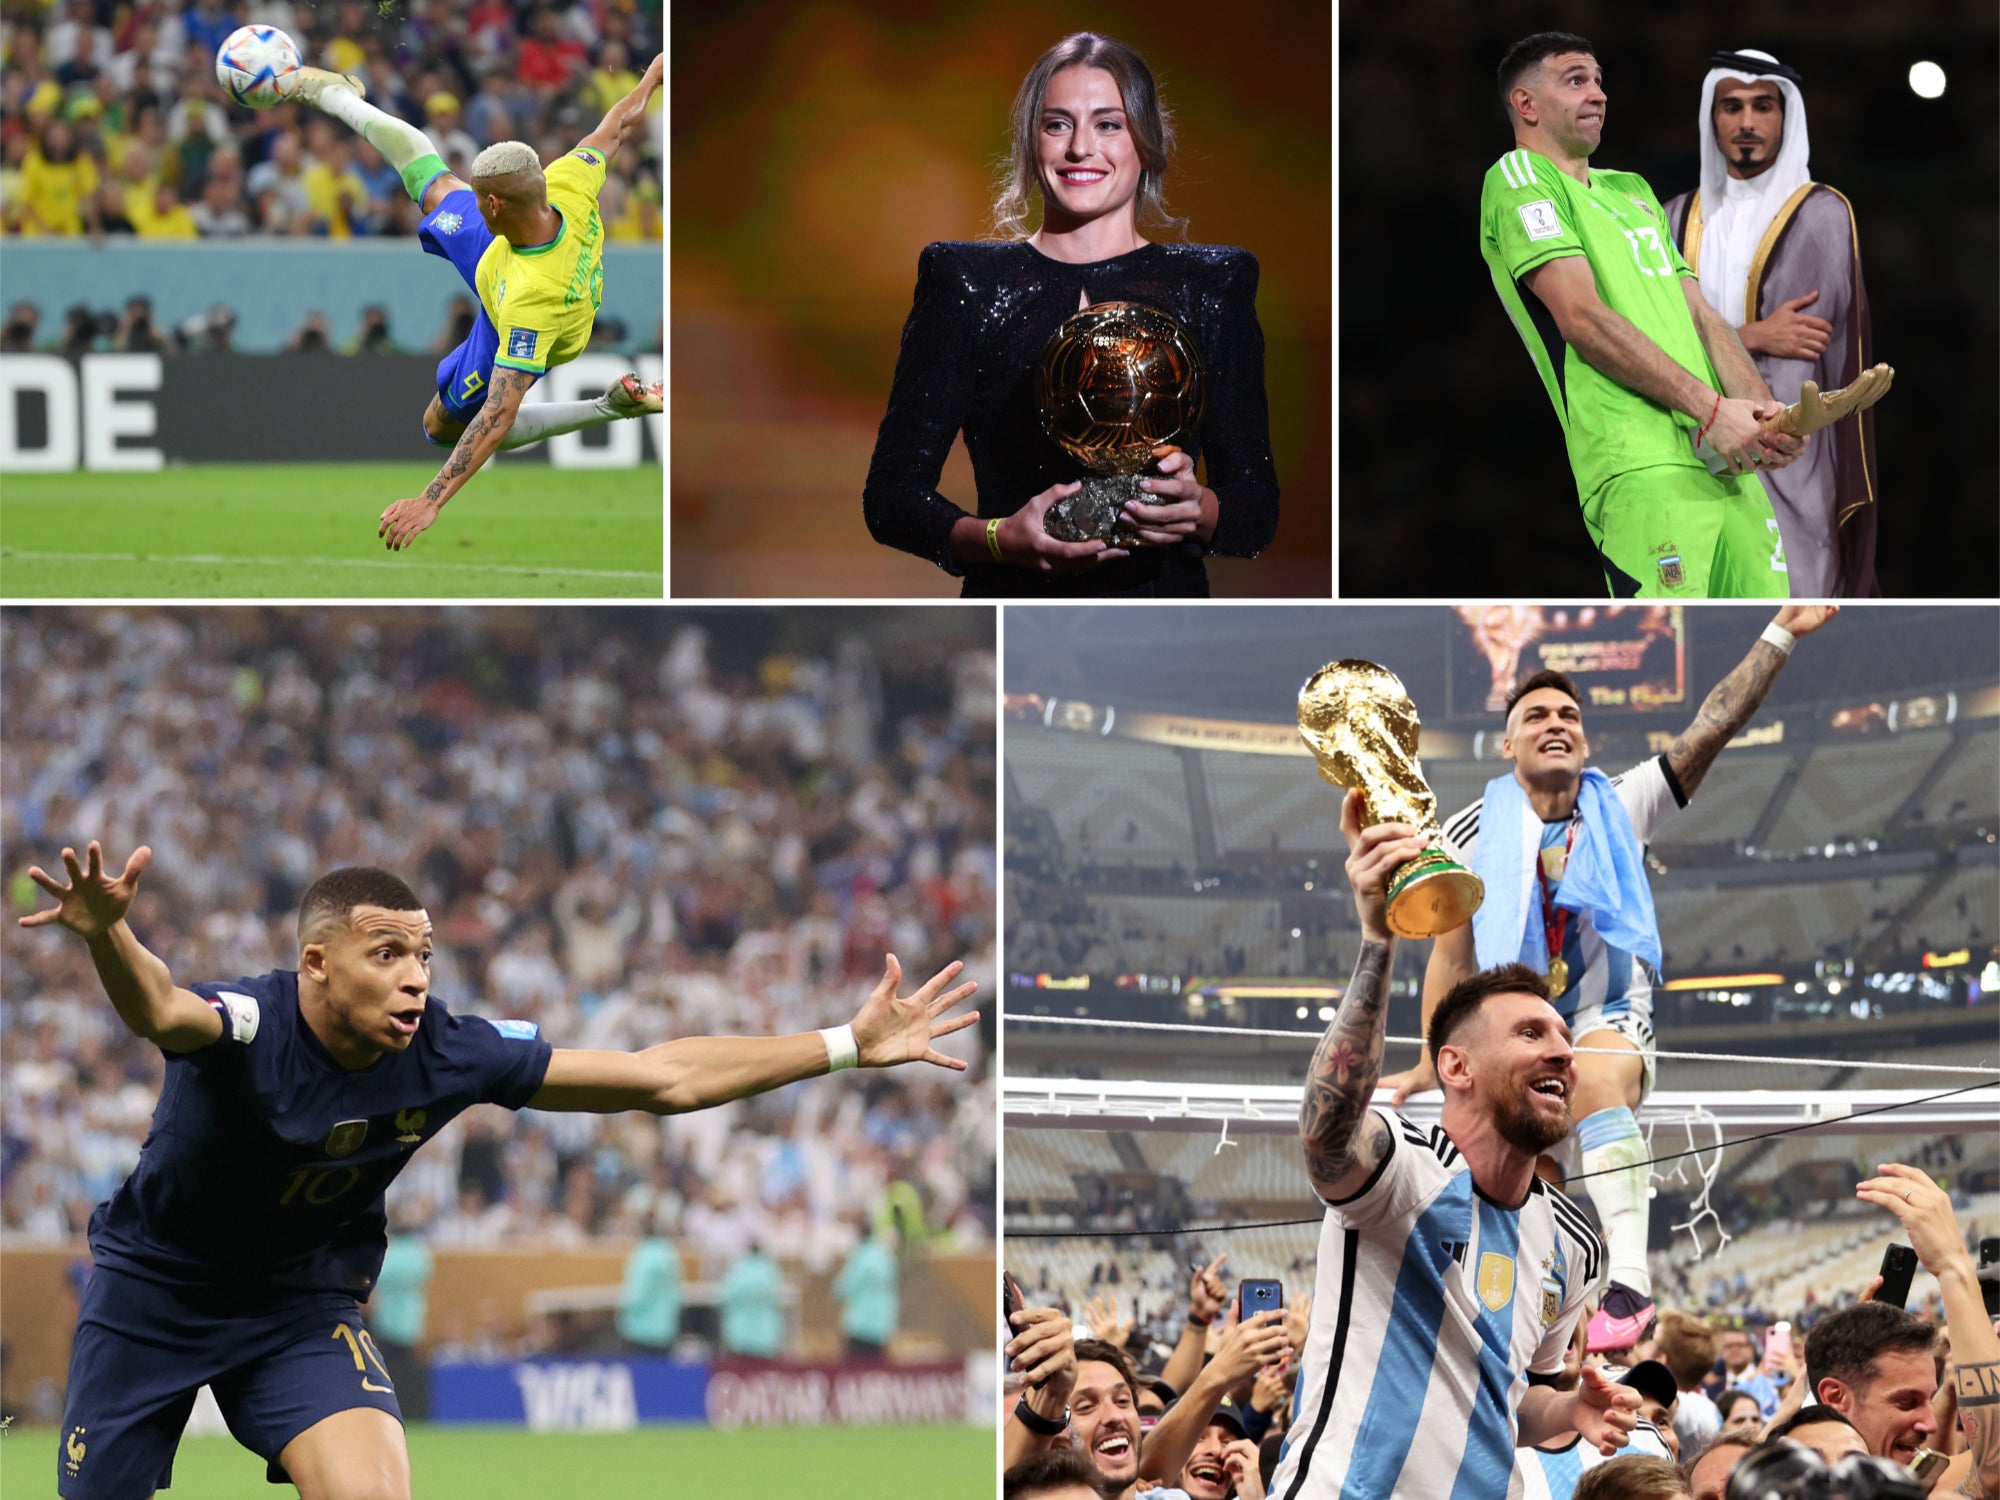 Clockwise from top left: Richarlison, Alexia Putellas, Emi Martinez, Lionel Messi and Kylian Mbappe